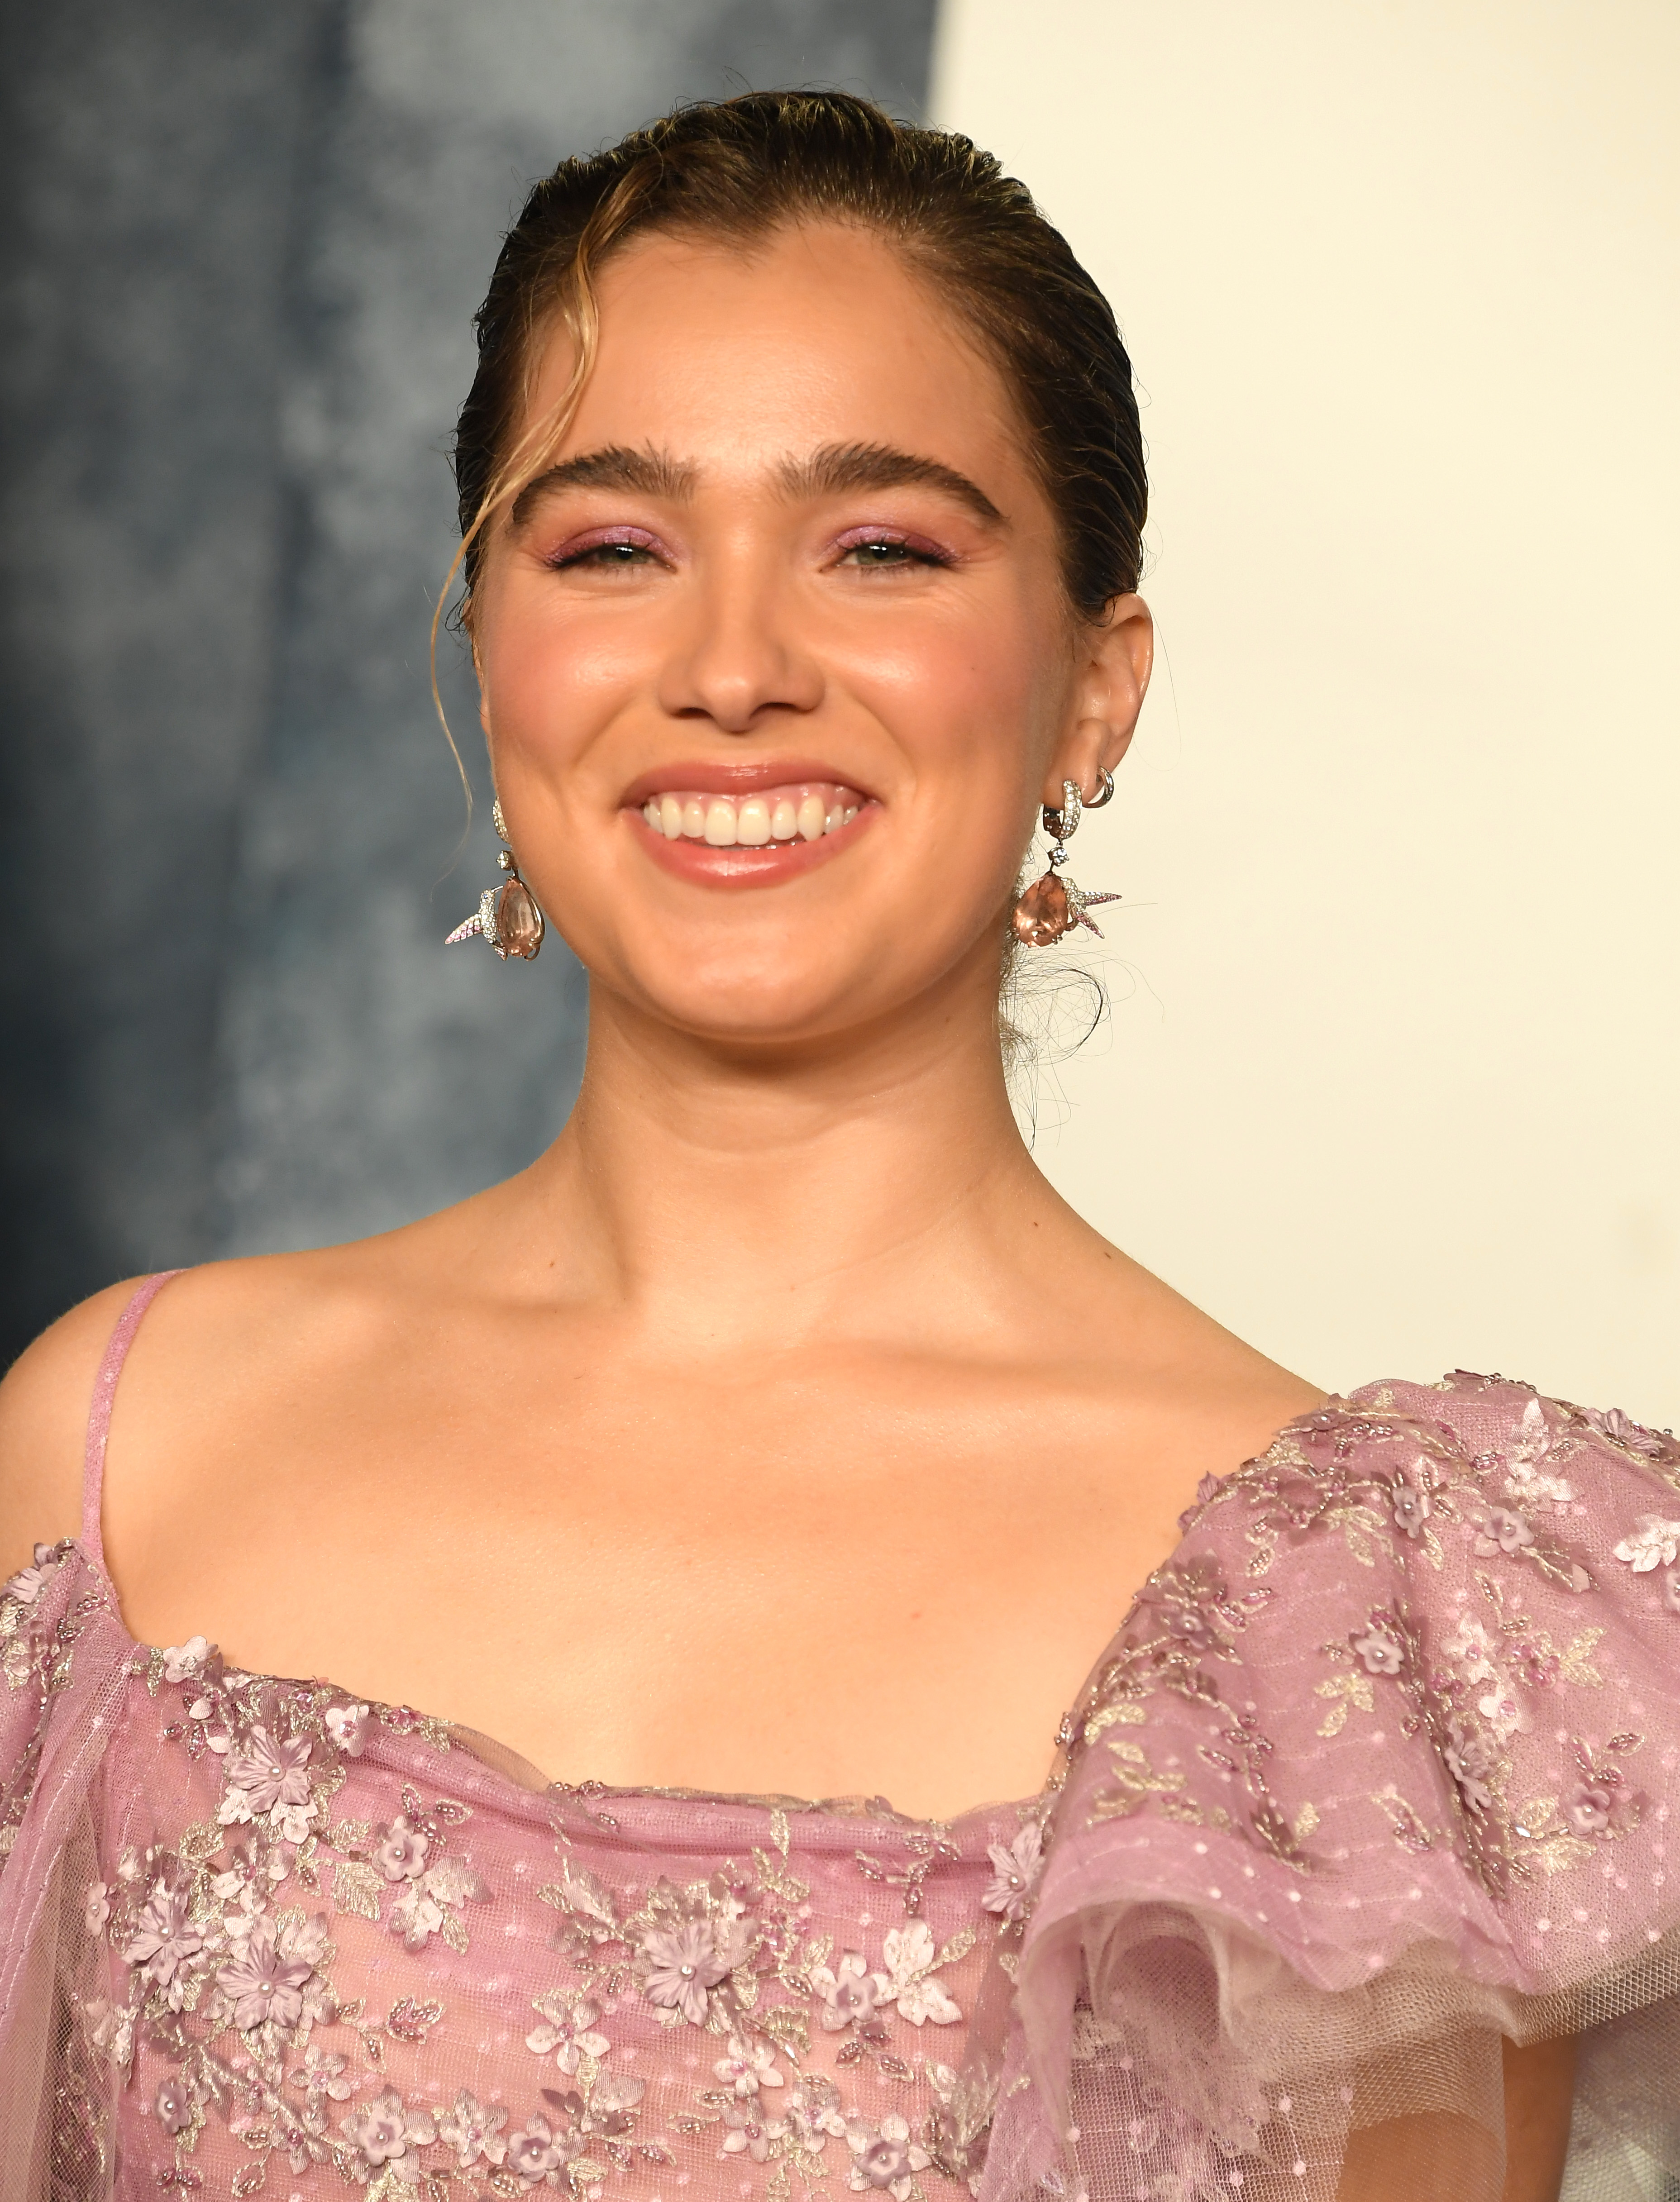 Haley Lu Richardson at Wallis Annenberg Center for the Performing Arts on March 12, 2023 in Beverly Hills, California. | Source: Getty Images